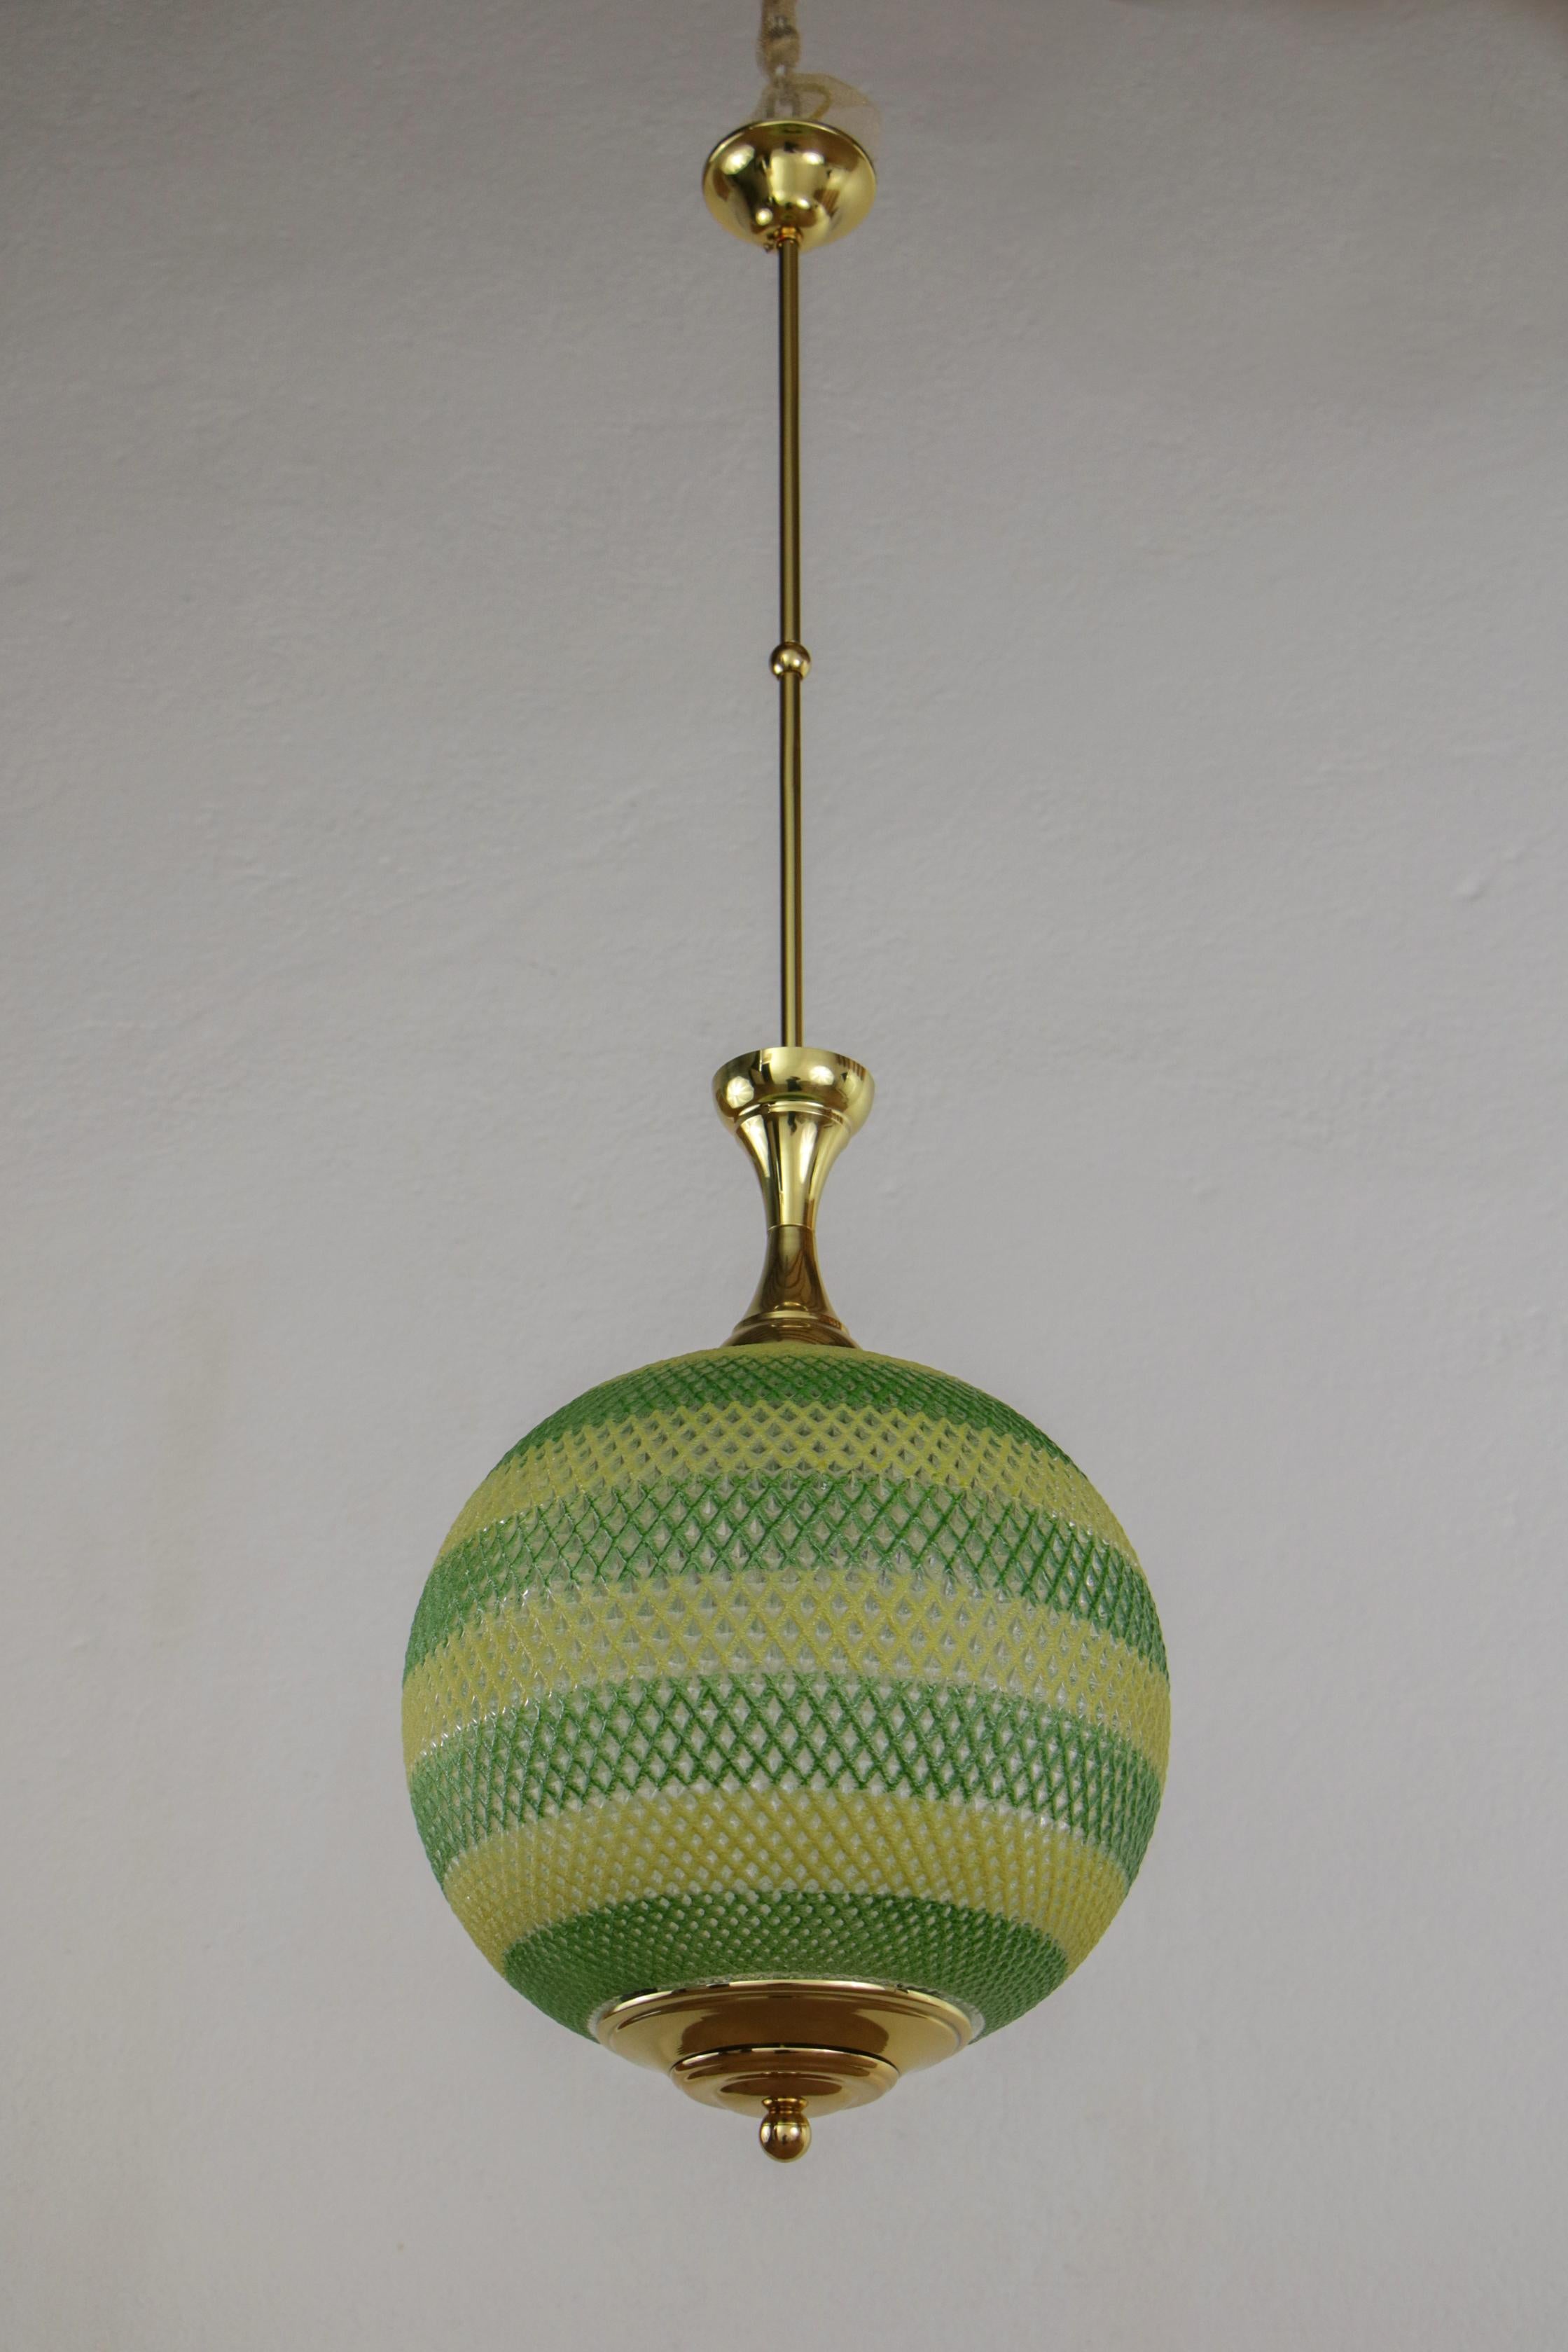 This Italian chandelier from the 1960s is a unique piece with a great decorative impact. It is made of yellow and green glass and shiny transparent lacquered brass. The glass parts are worked in relief and show a great quality of execution. The